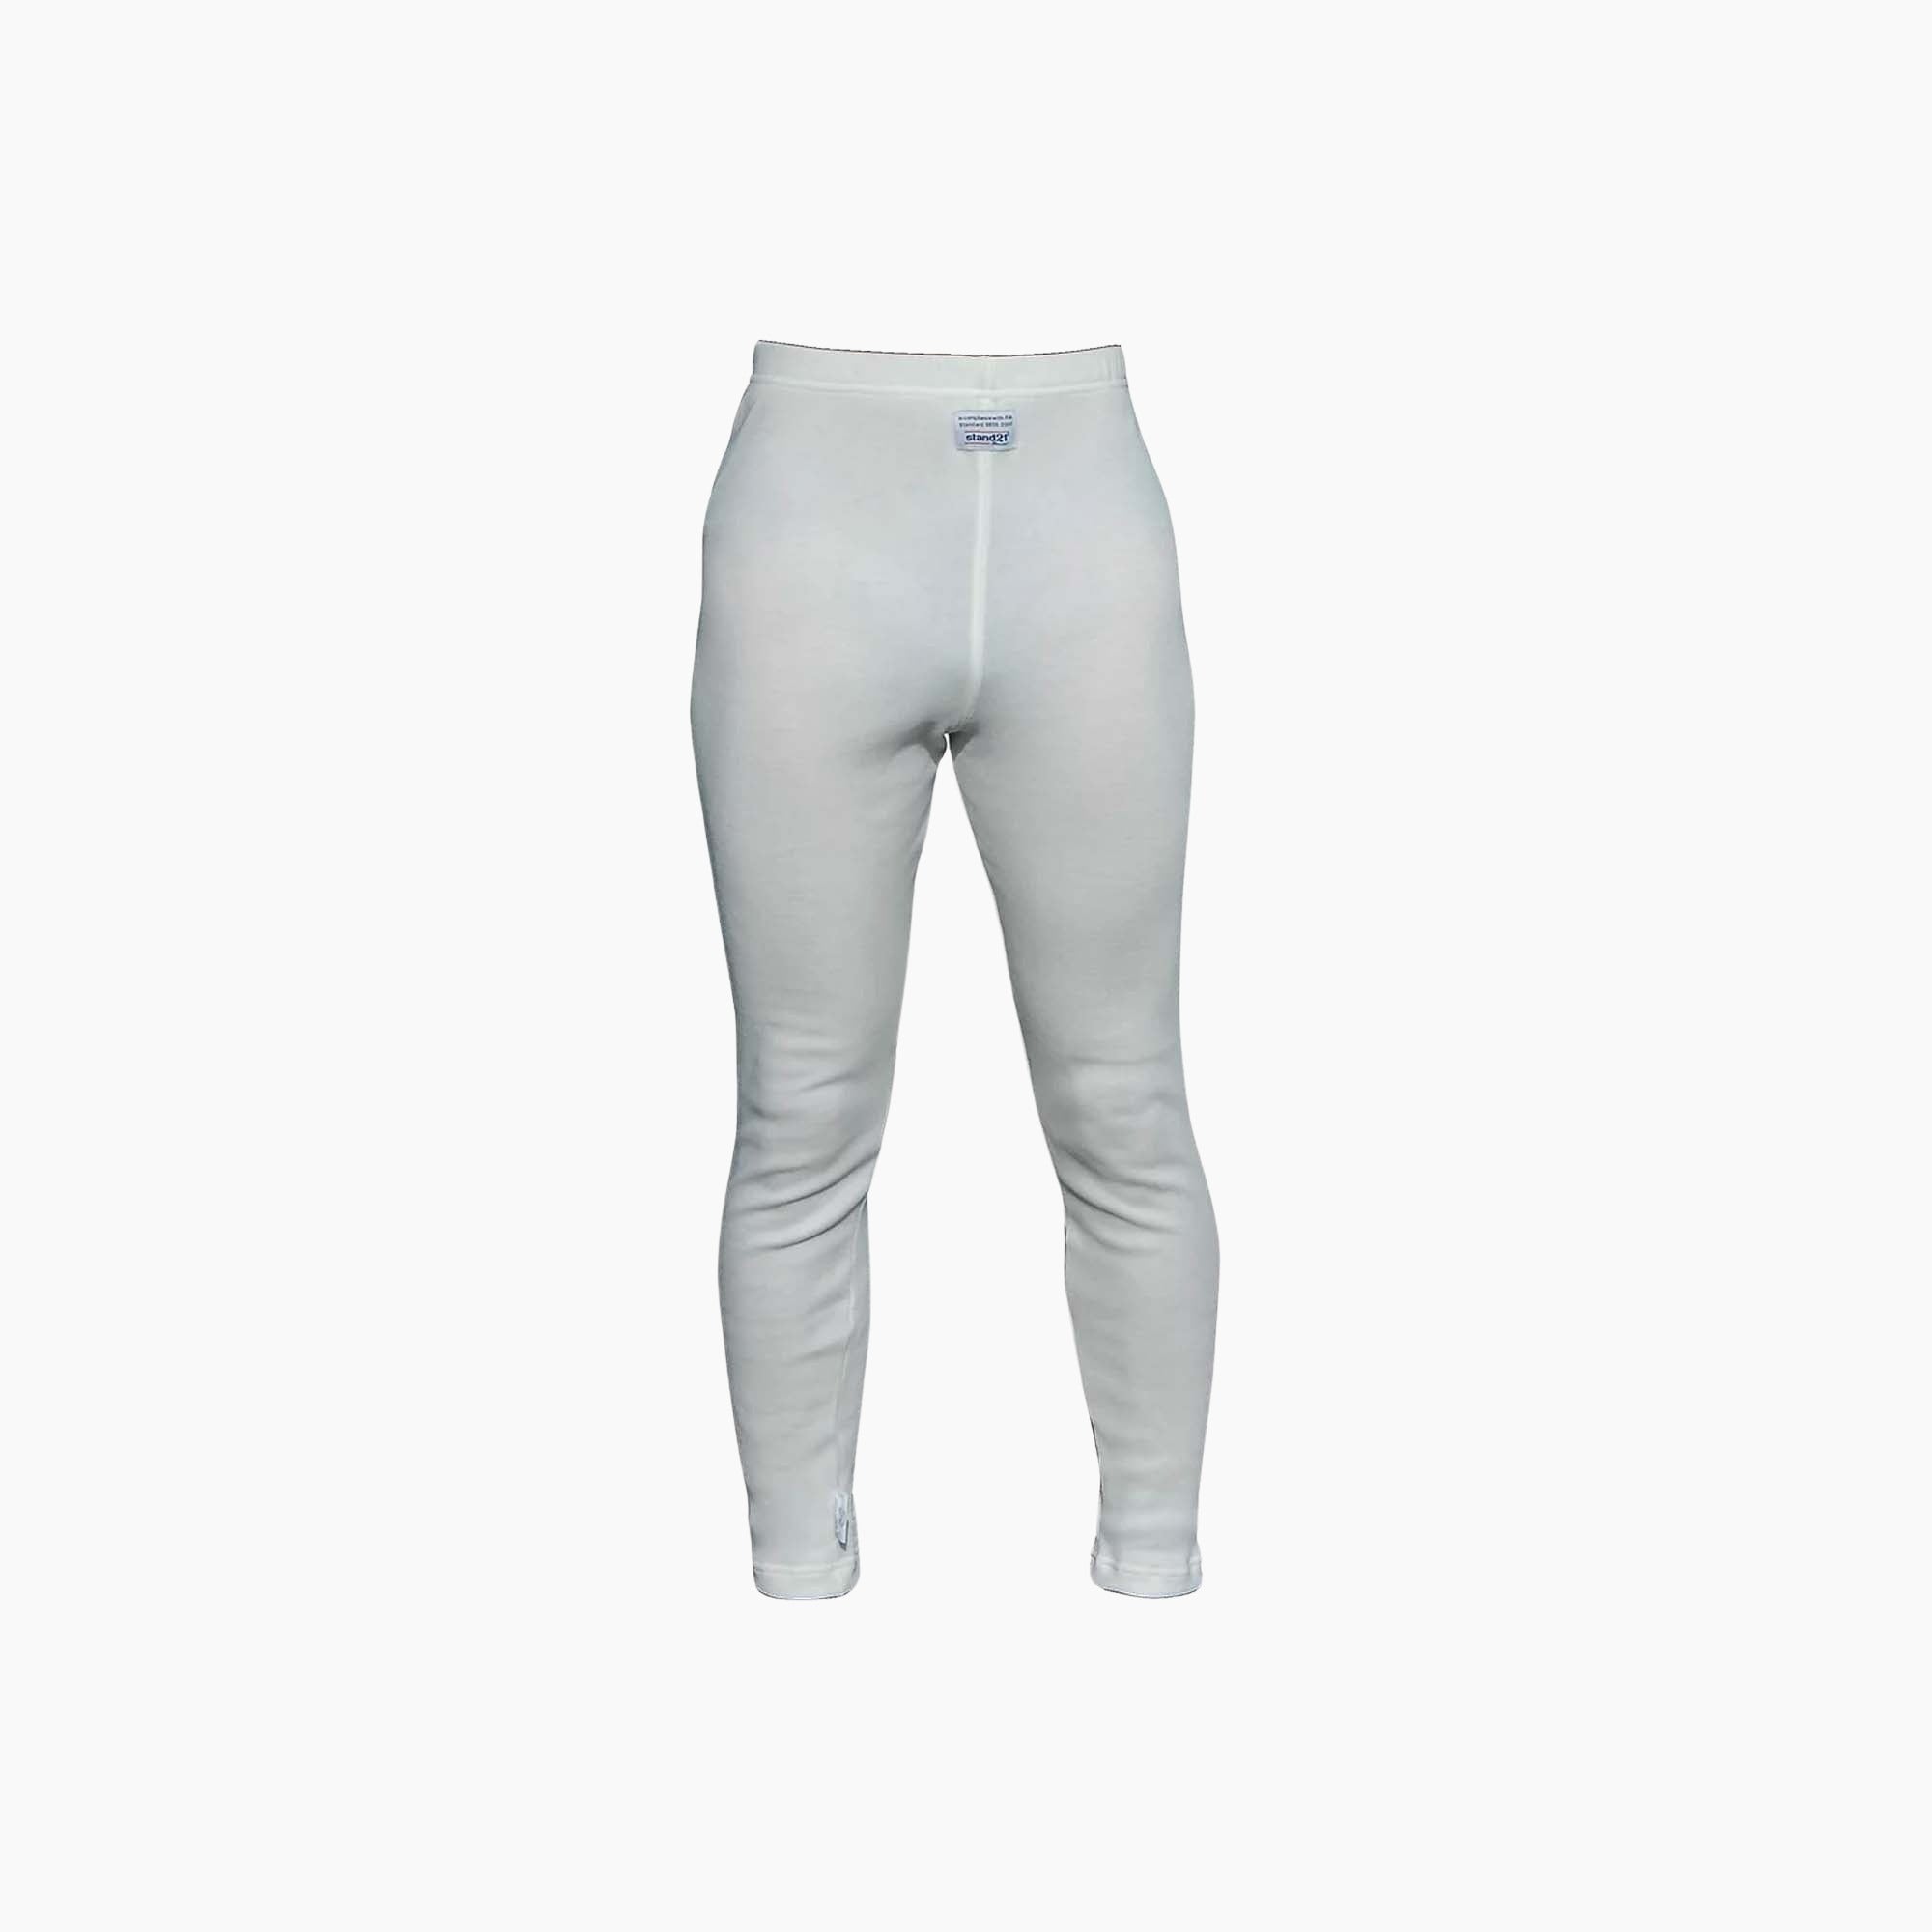 Stand 21 | Underwear Top Fit Pants White-Racing Underwear-STAND 21-gpx-store